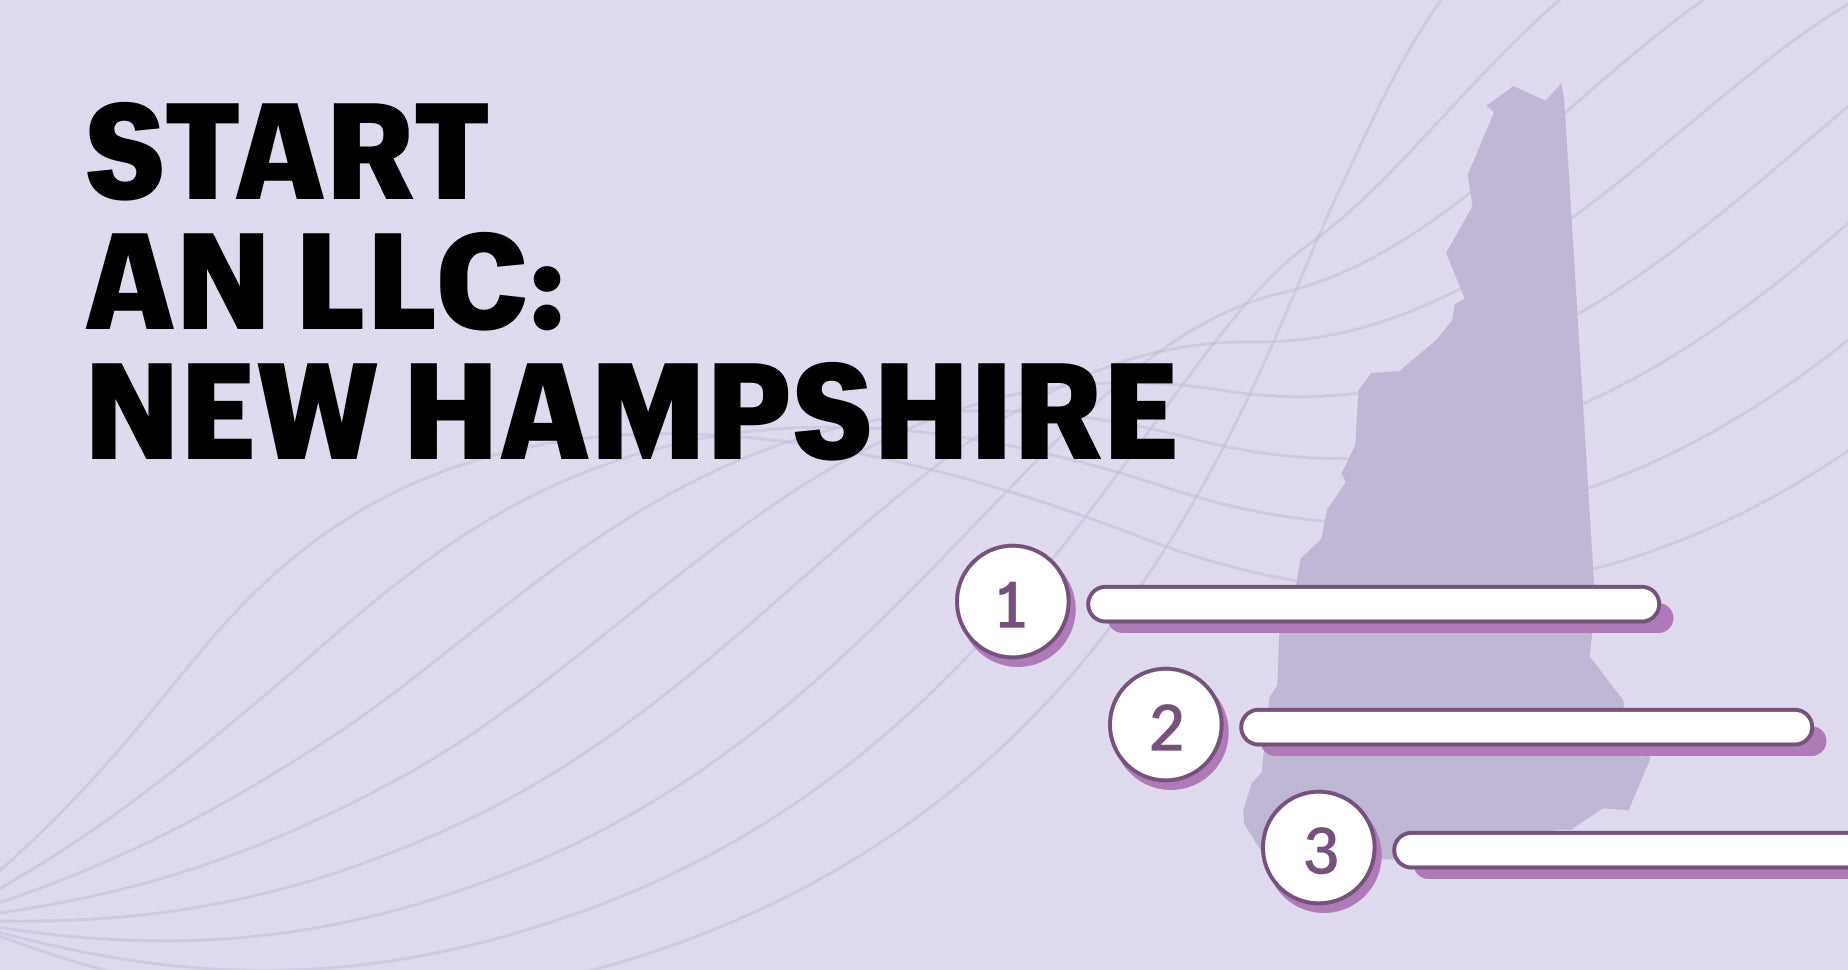 start an llc: new hampshire on left, right is silhouette of state with overlay of steps to indicate what it takes to start an llc in nh